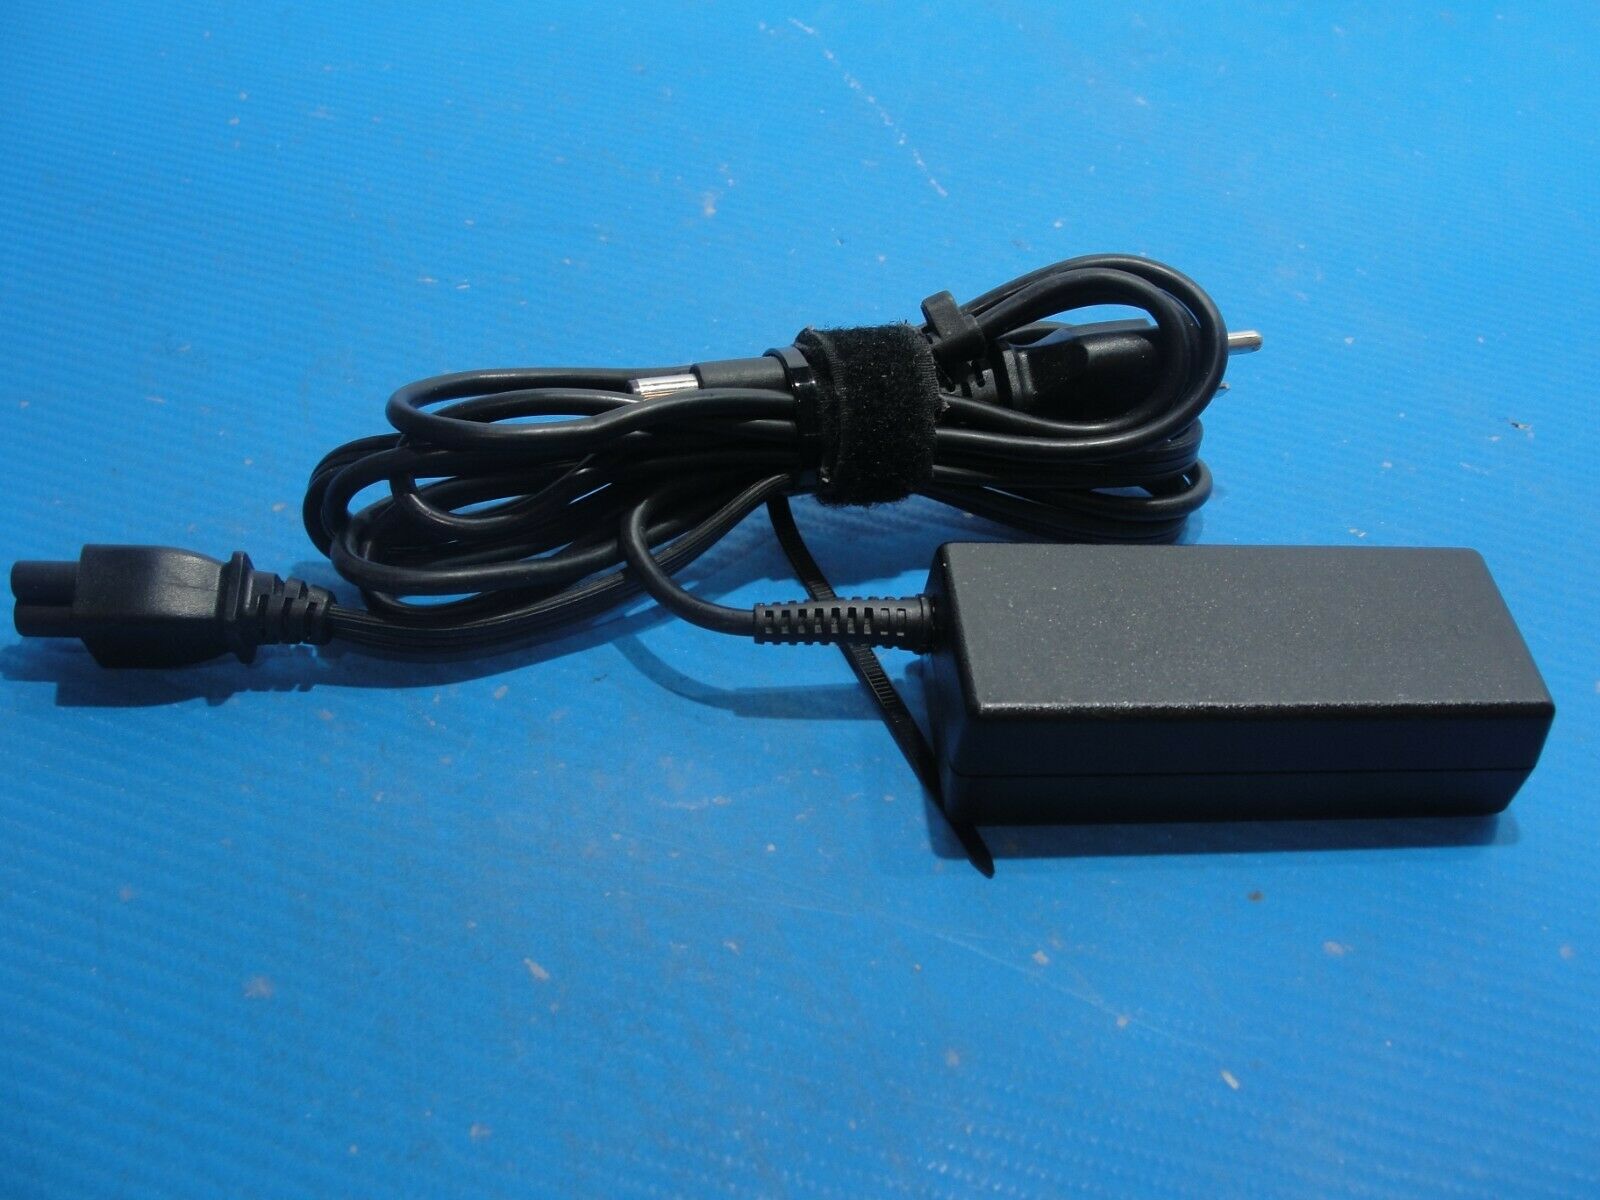 Genuine HP AC Adapter Power Charger 19.5V 3.33A 65W 693711-001 